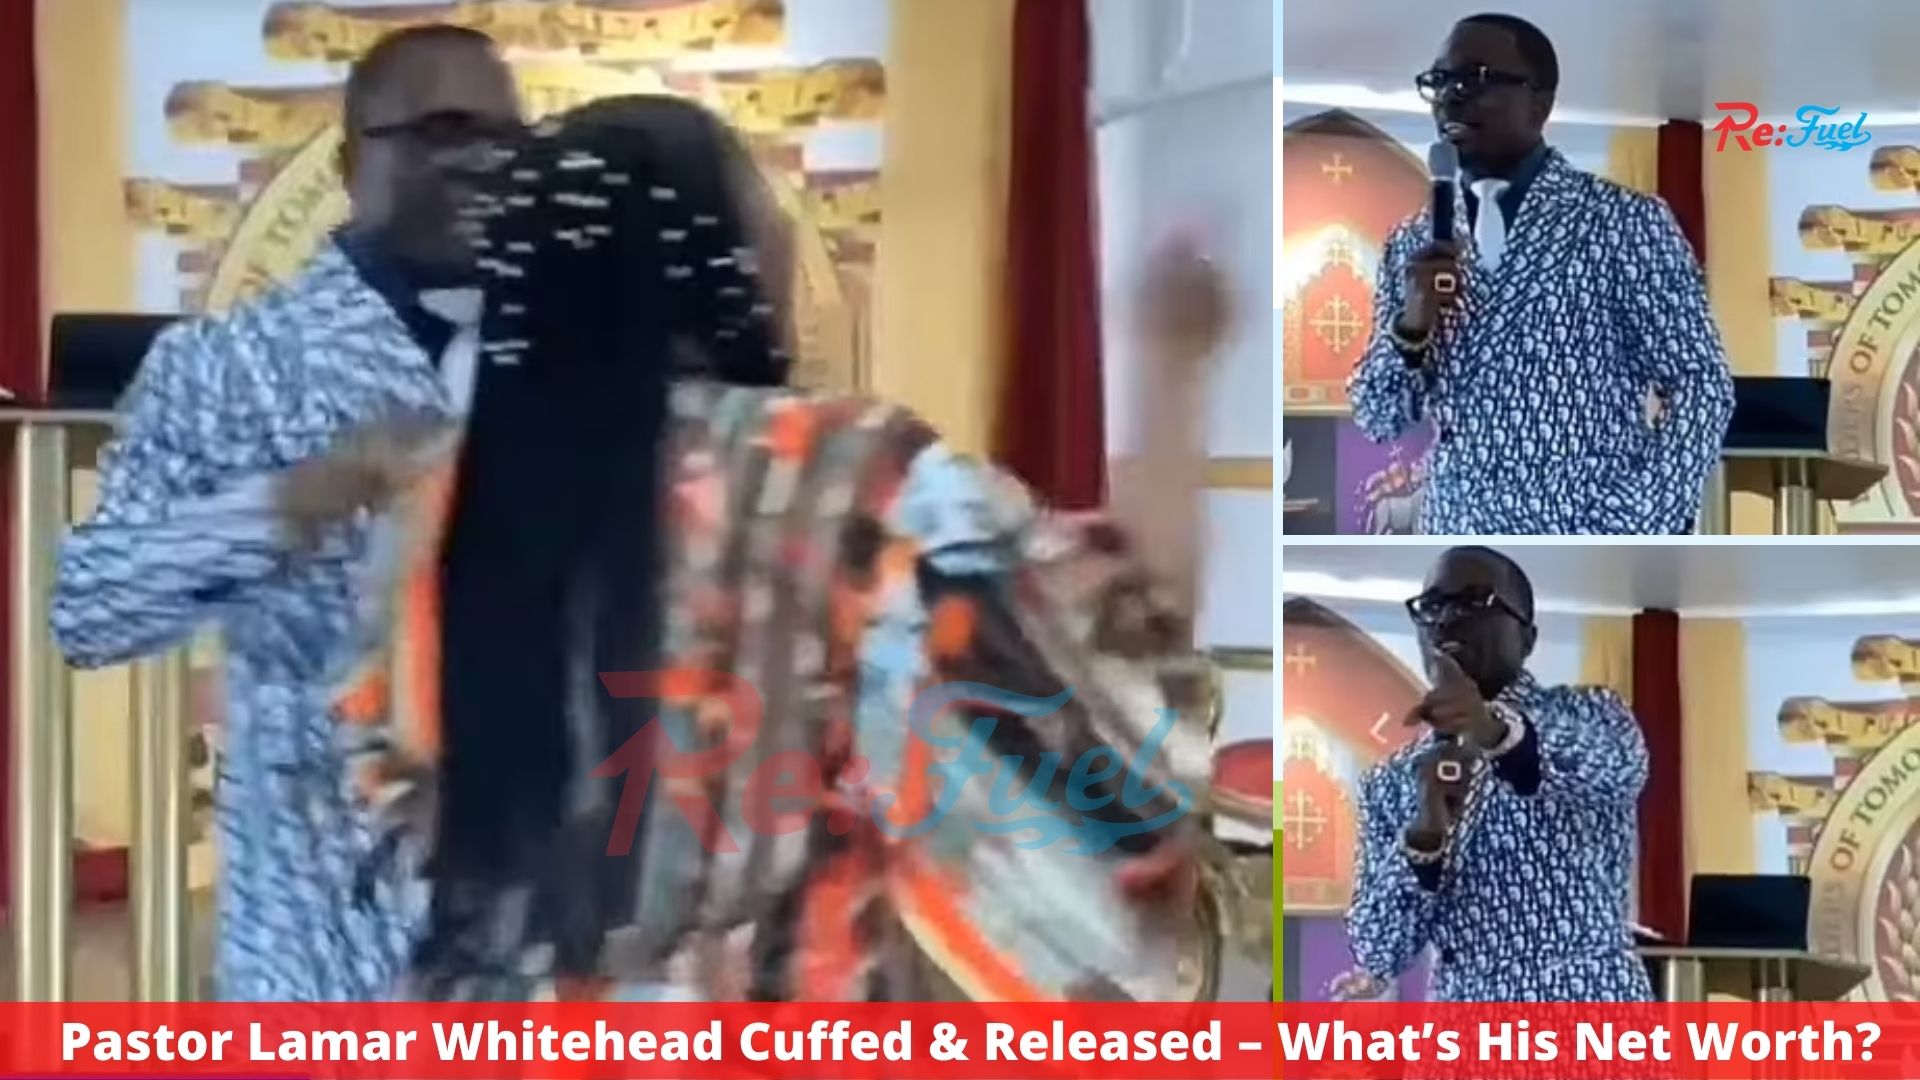 Pastor Lamar Whitehead Cuffed & Released - What's His Net Worth?